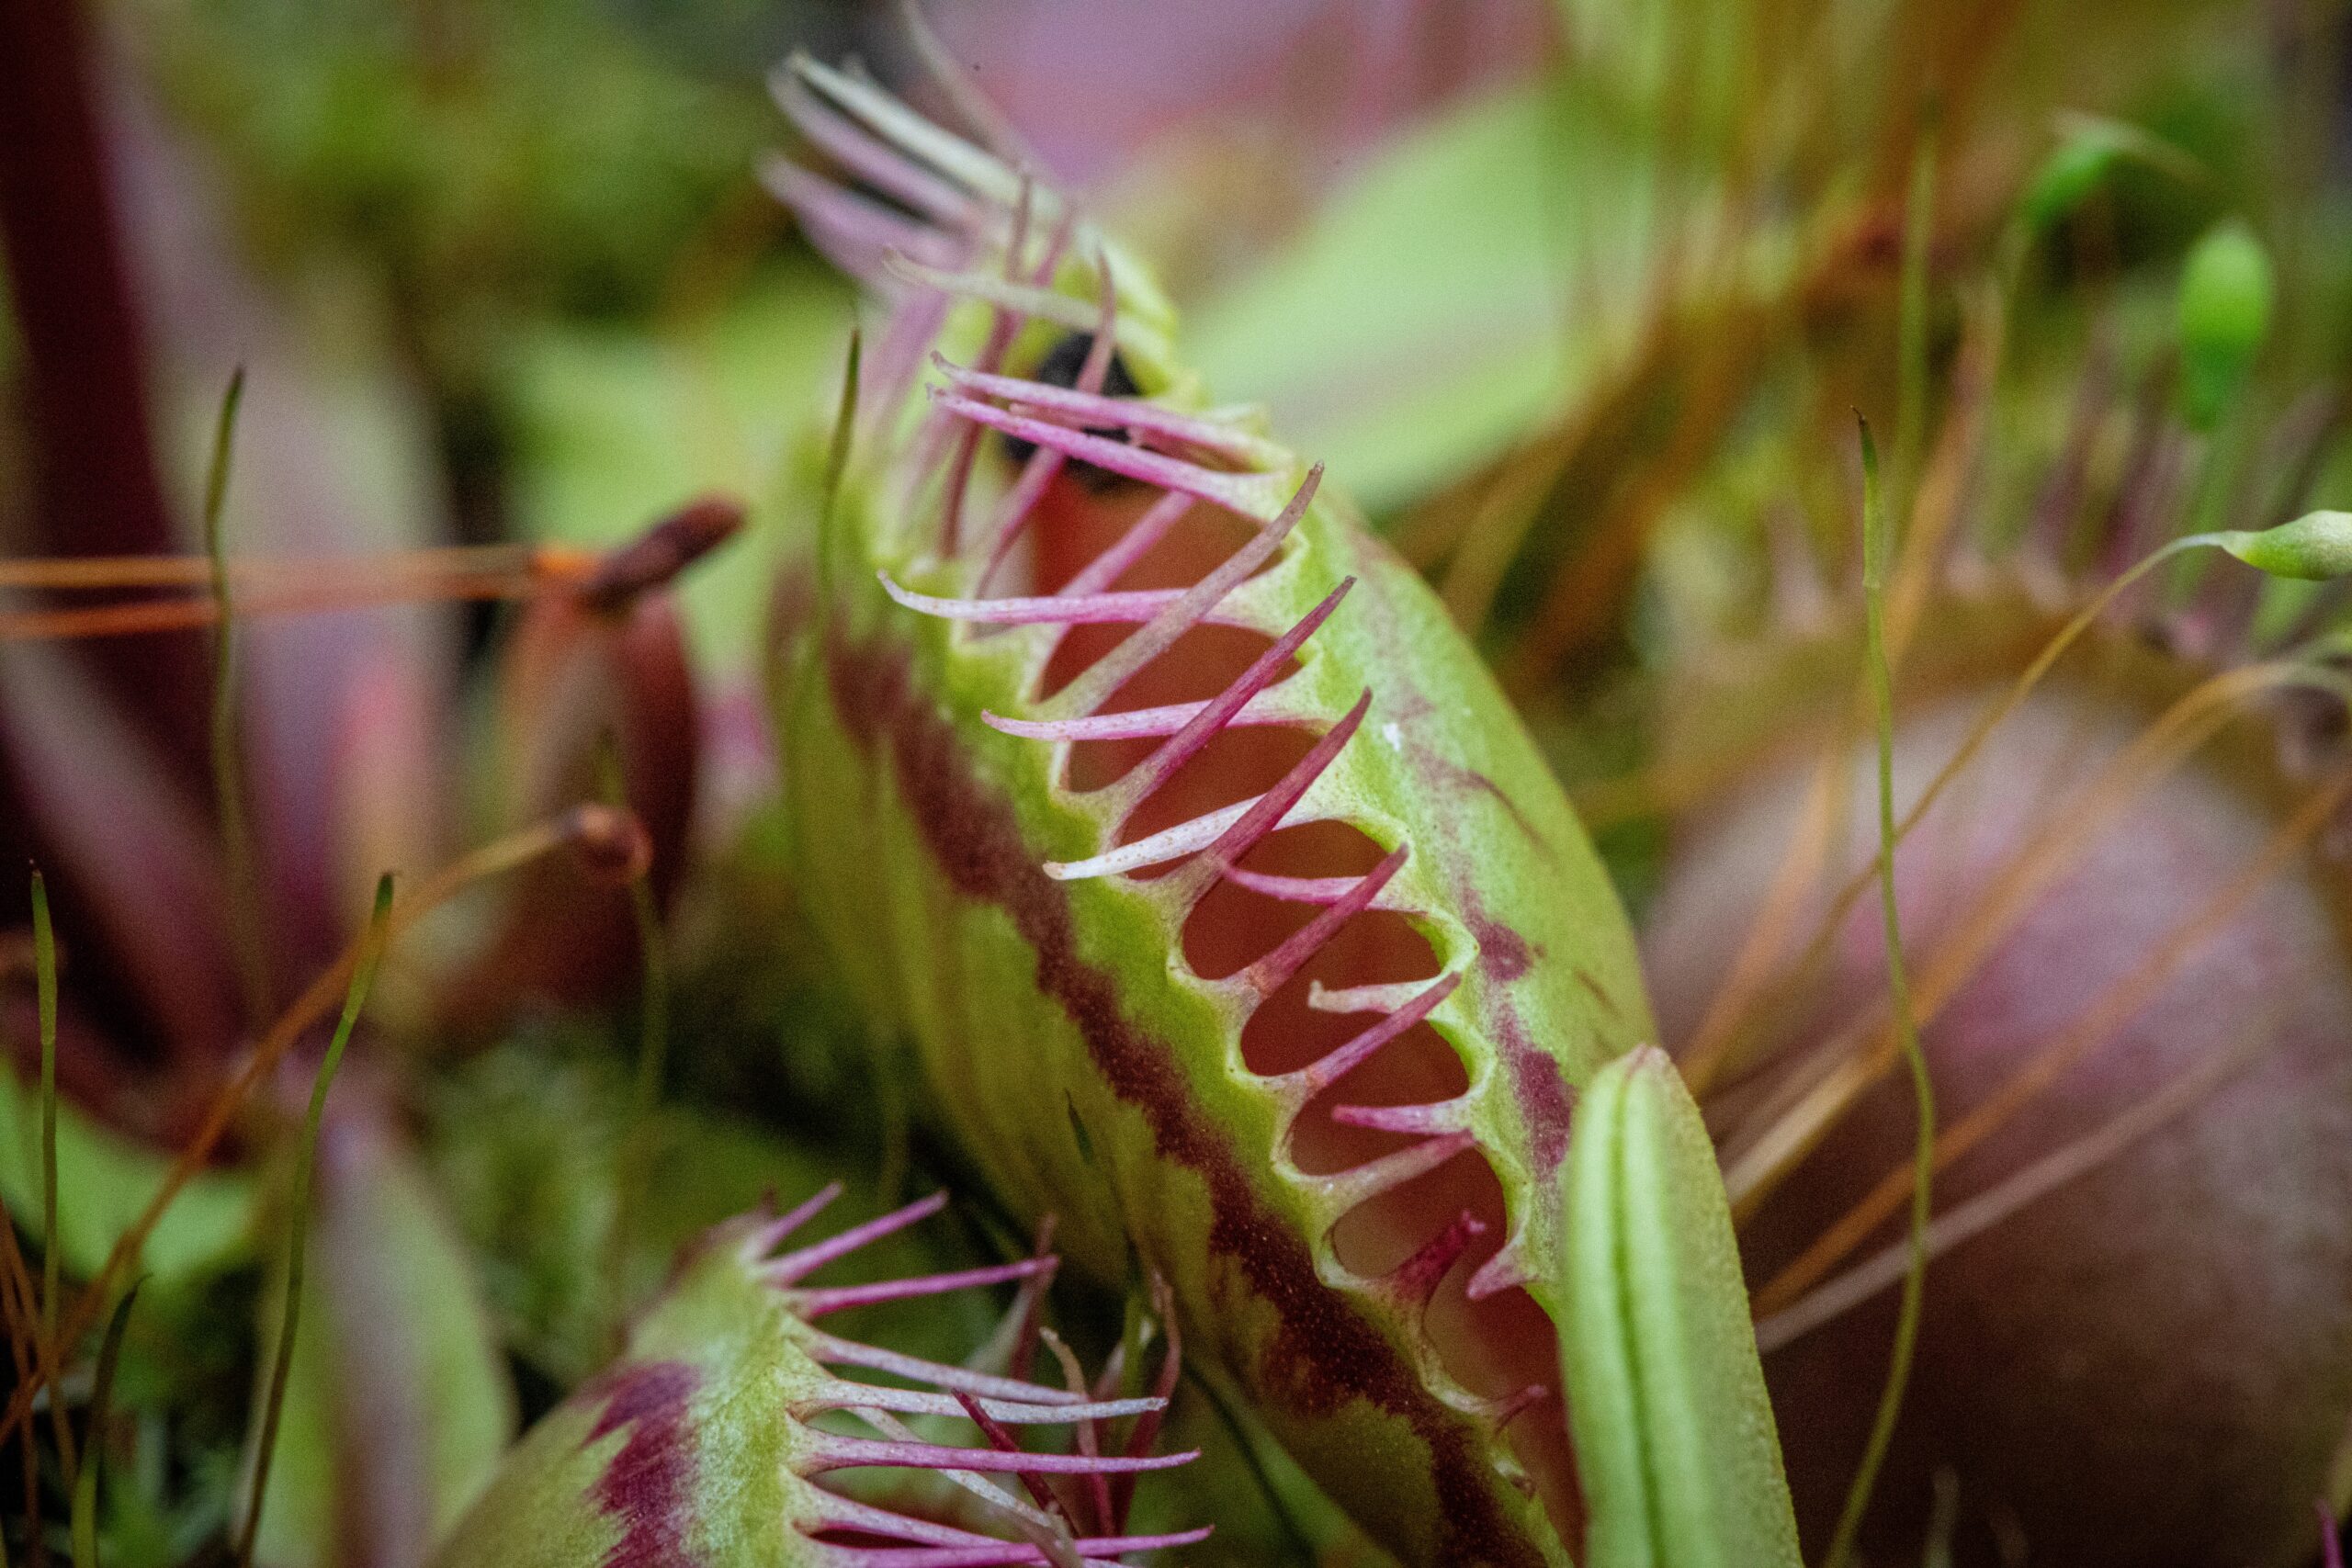 Venus fly traps are plants that deter flies by using their jaw-like structure and nectar to trap flies. Pictured: A venus flytrap.